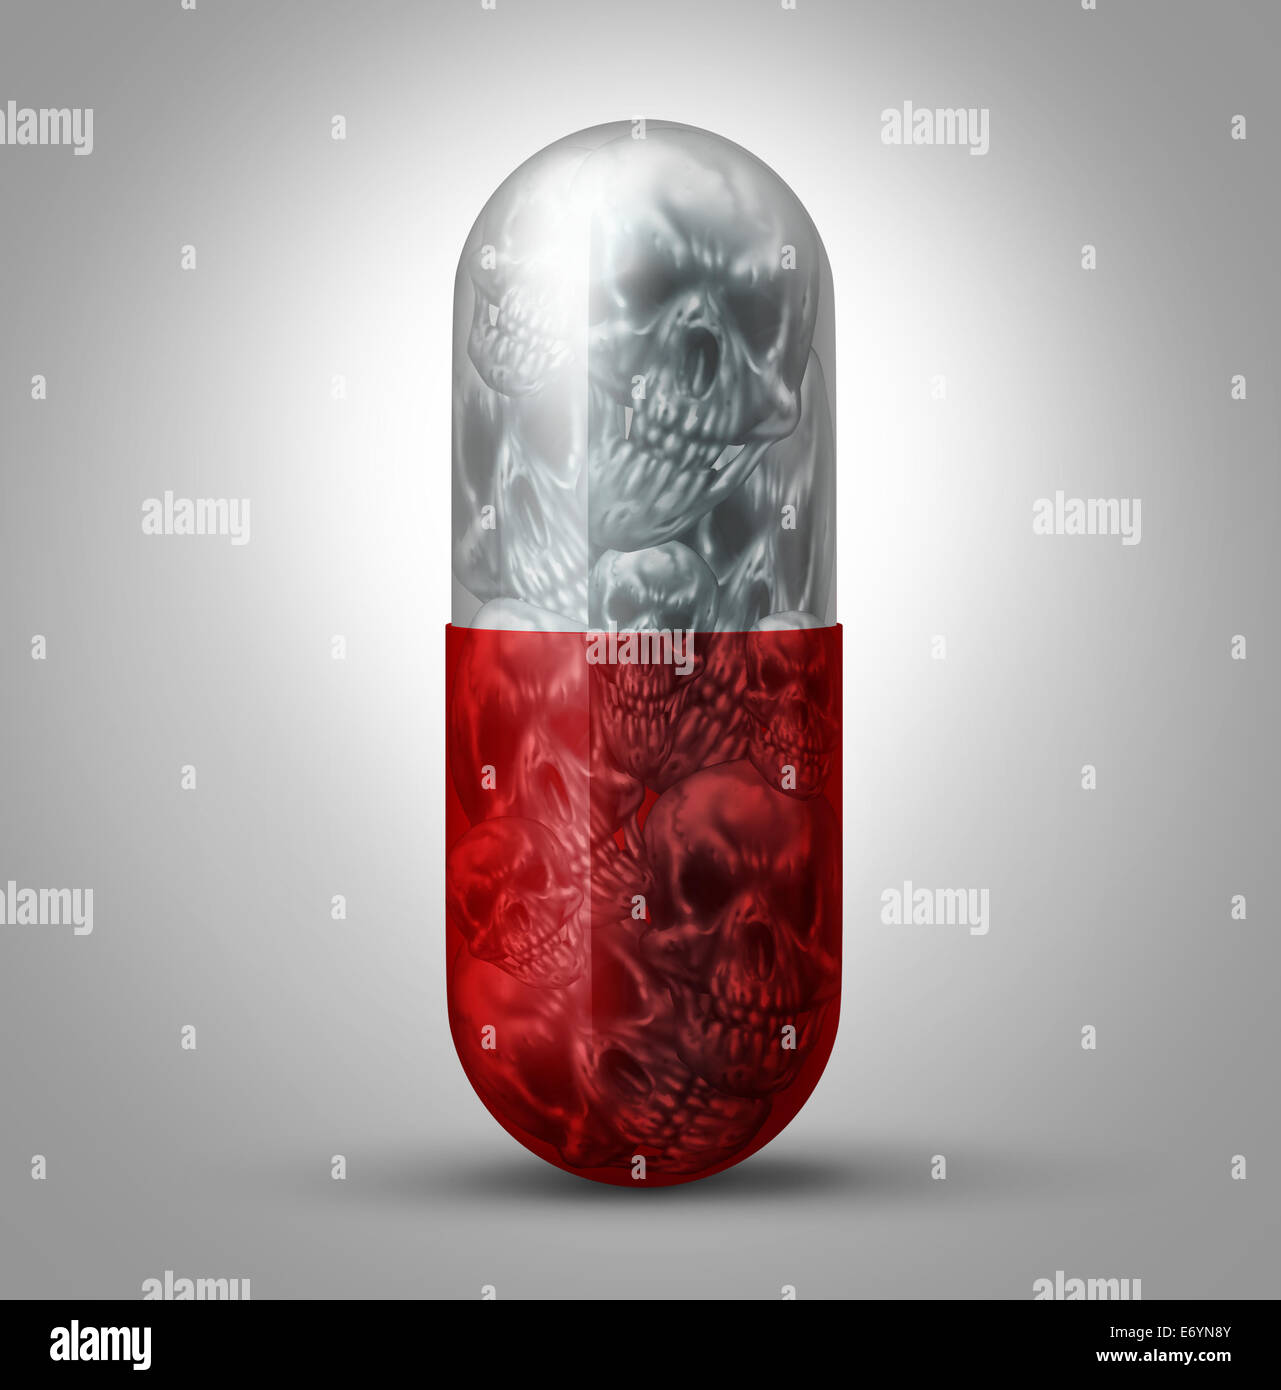 Prescription drug abuse concept as a social issue symbol for the addiction to pharmaceutical medication and the health danger and problem of being addicted to and overdose of prescribed medicine. Stock Photo